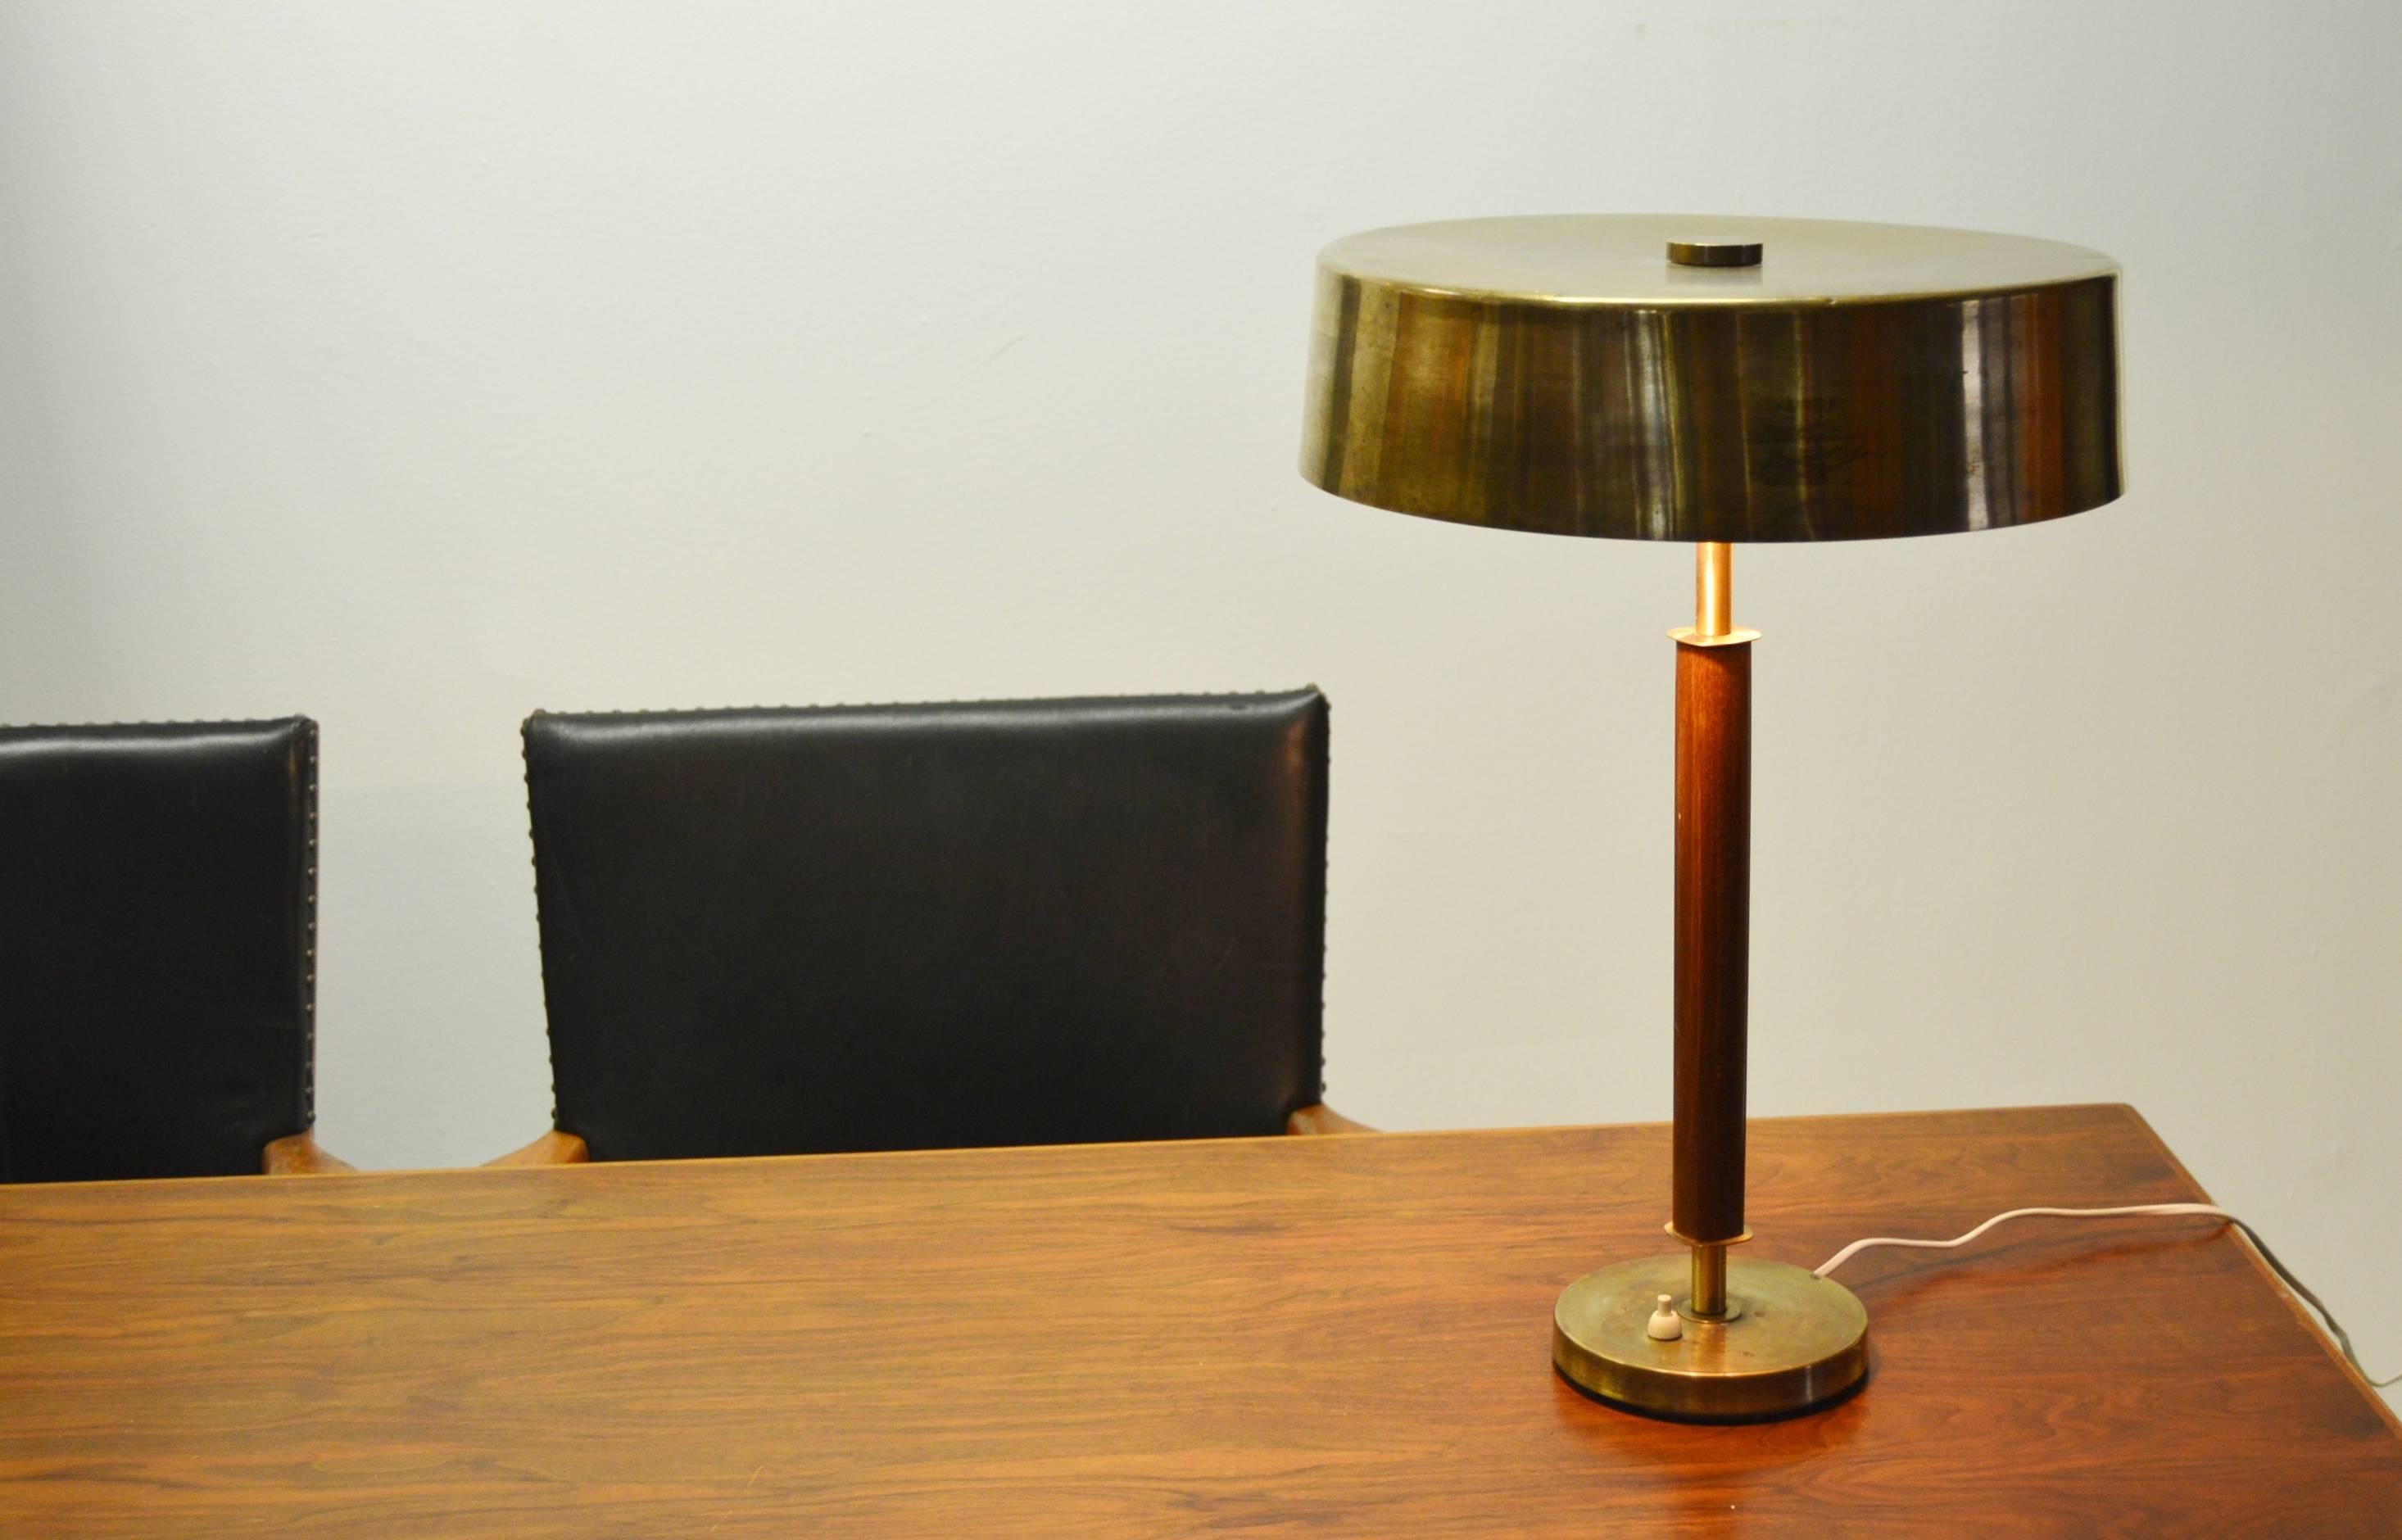 Heavy, solid and well-made. Larger than normal for this type of desk table lamp.
For us, unknown better manufacturer.
Brass and wood, most likely stained birch.
Signs of usage and minor traces of an old sticker on the lampshade, as shown in the